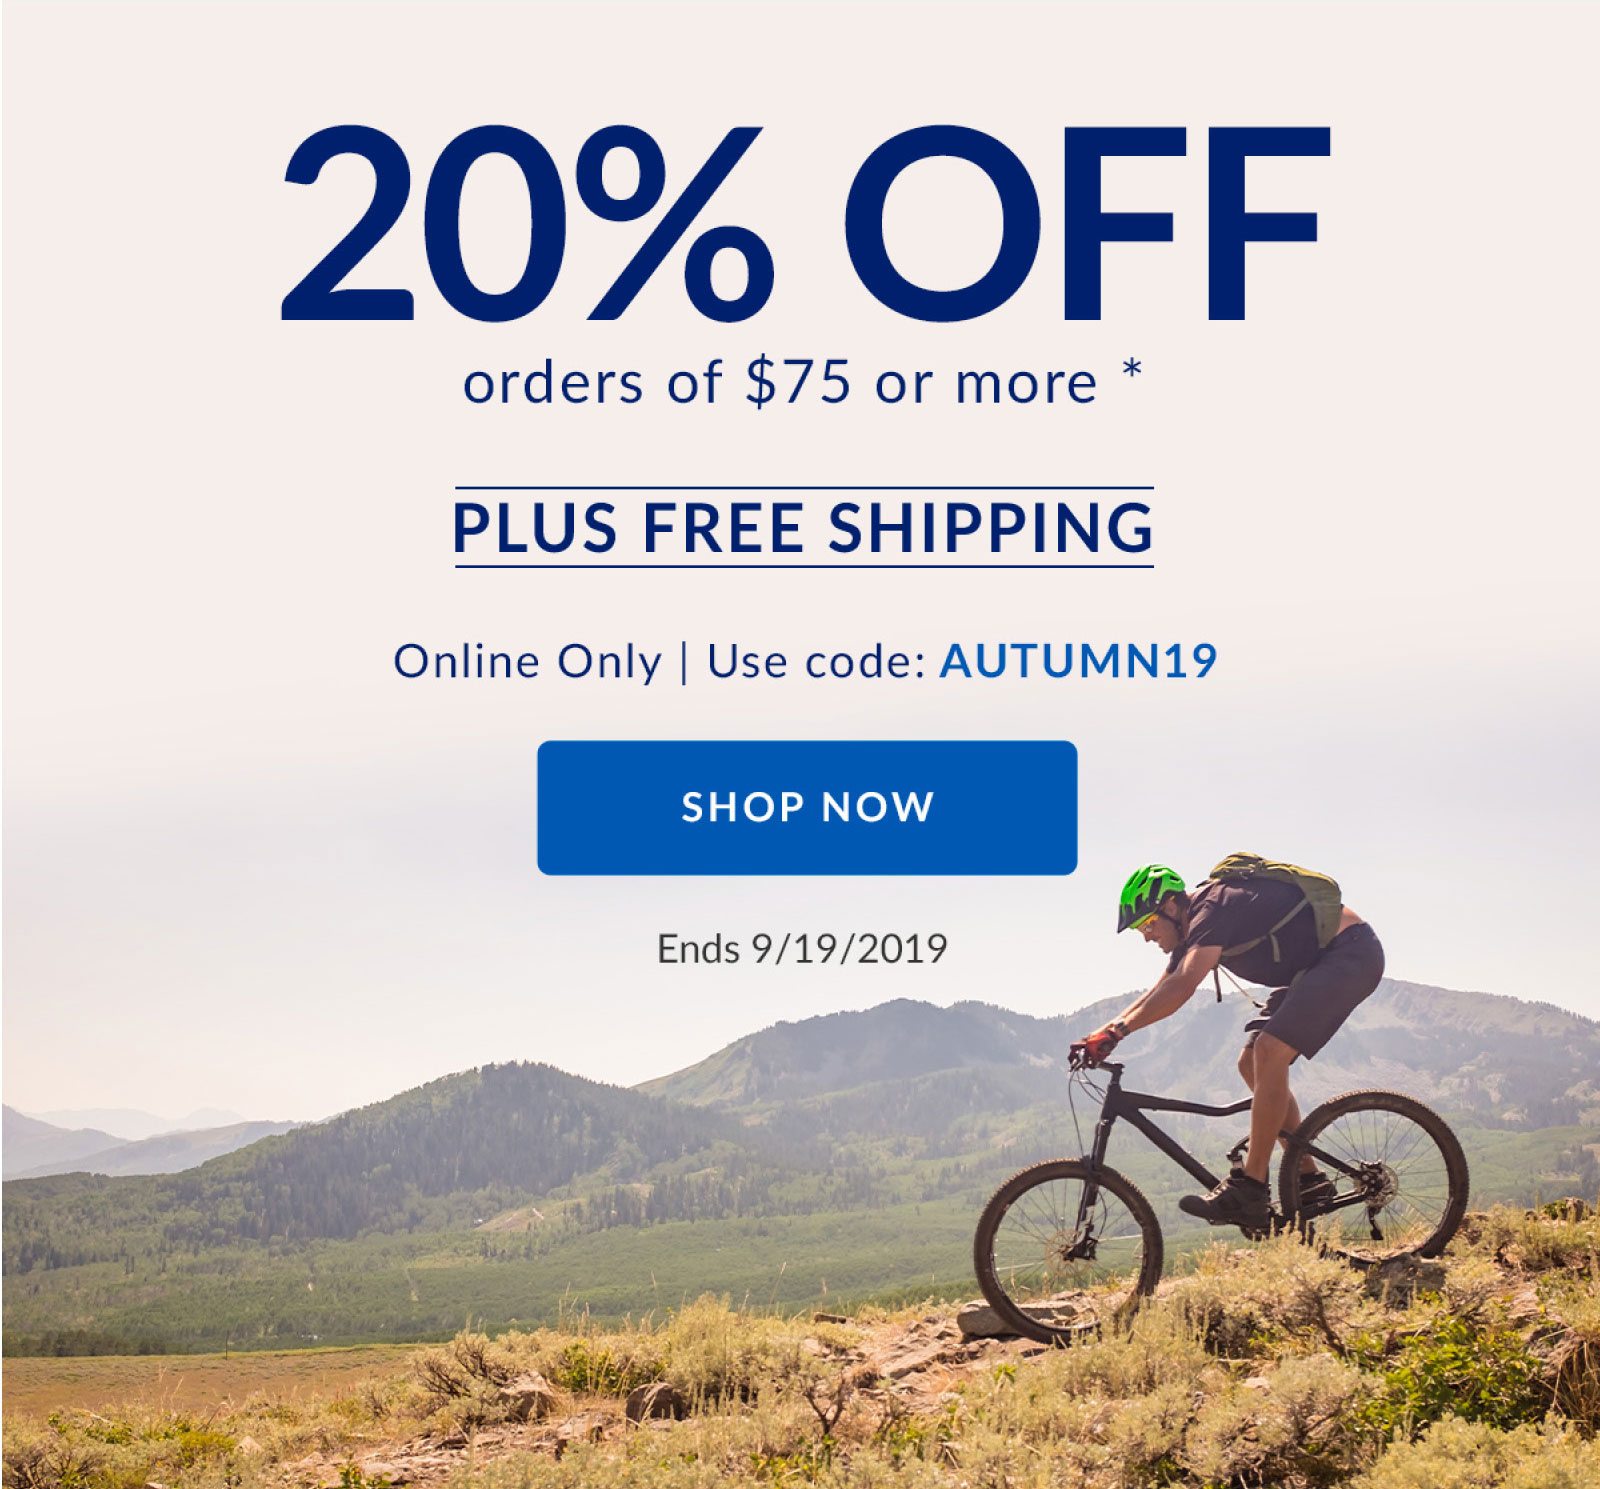 20% OFF orders of $75 or more * | PLUS FREE SHIPPING | Online ONly | Use code: AUTUMN19 | SHOP NOW | Ends 9/19/2019